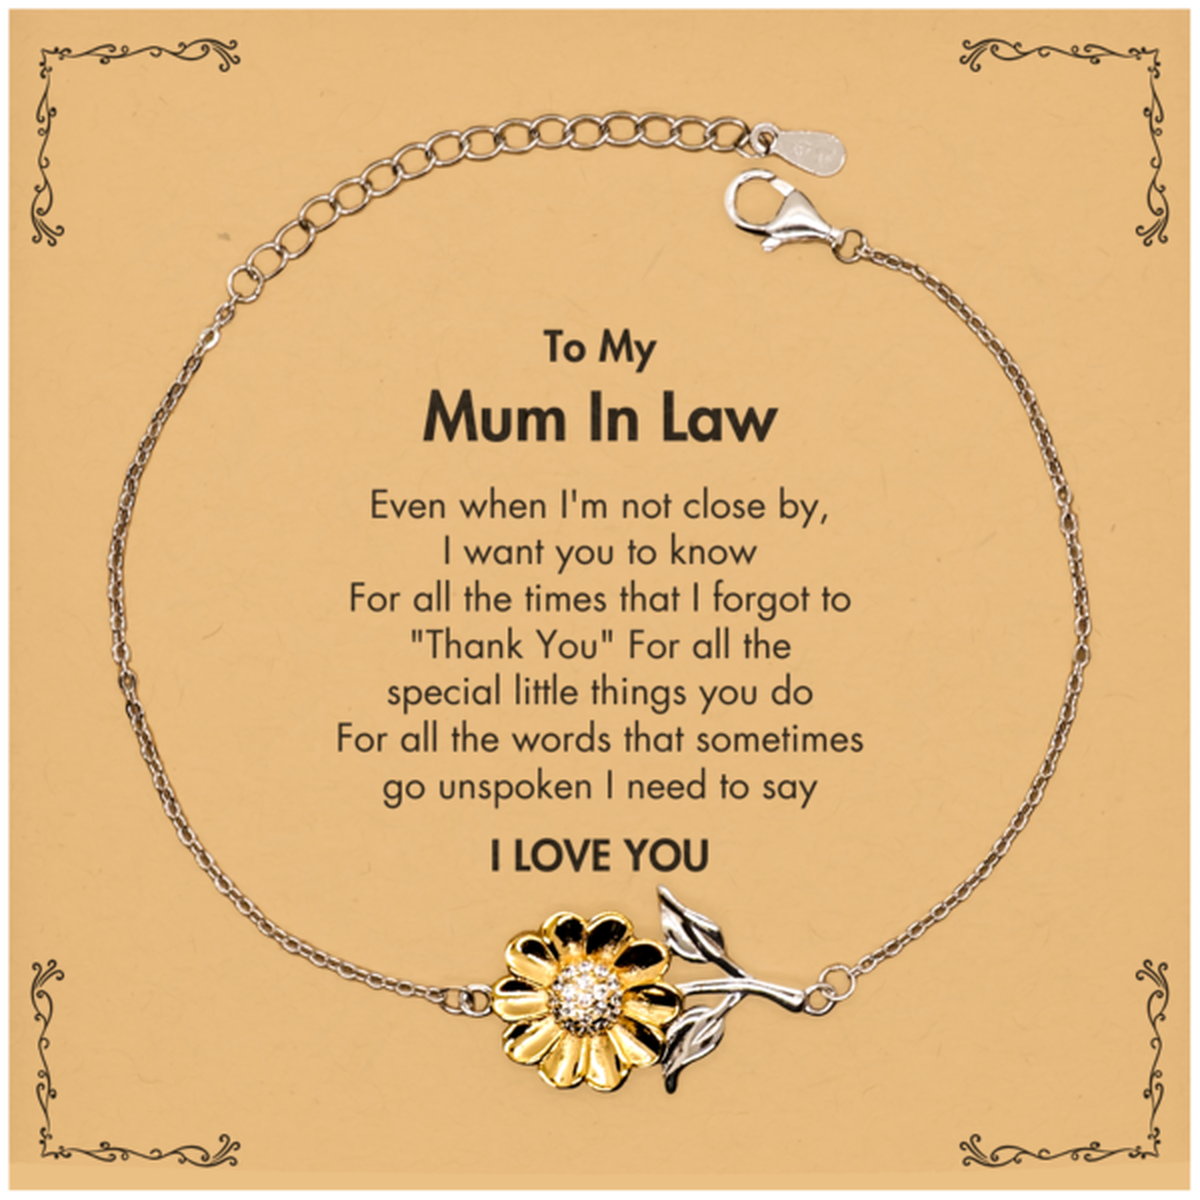 Thank You Gifts for Mum In Law , Keepsake Sunflower Bracelet Gifts for Mum In Law  Birthday Mother's day Father's Day Mum In Law  For all the words That sometimes go unspoken I need to say I LOVE YOU